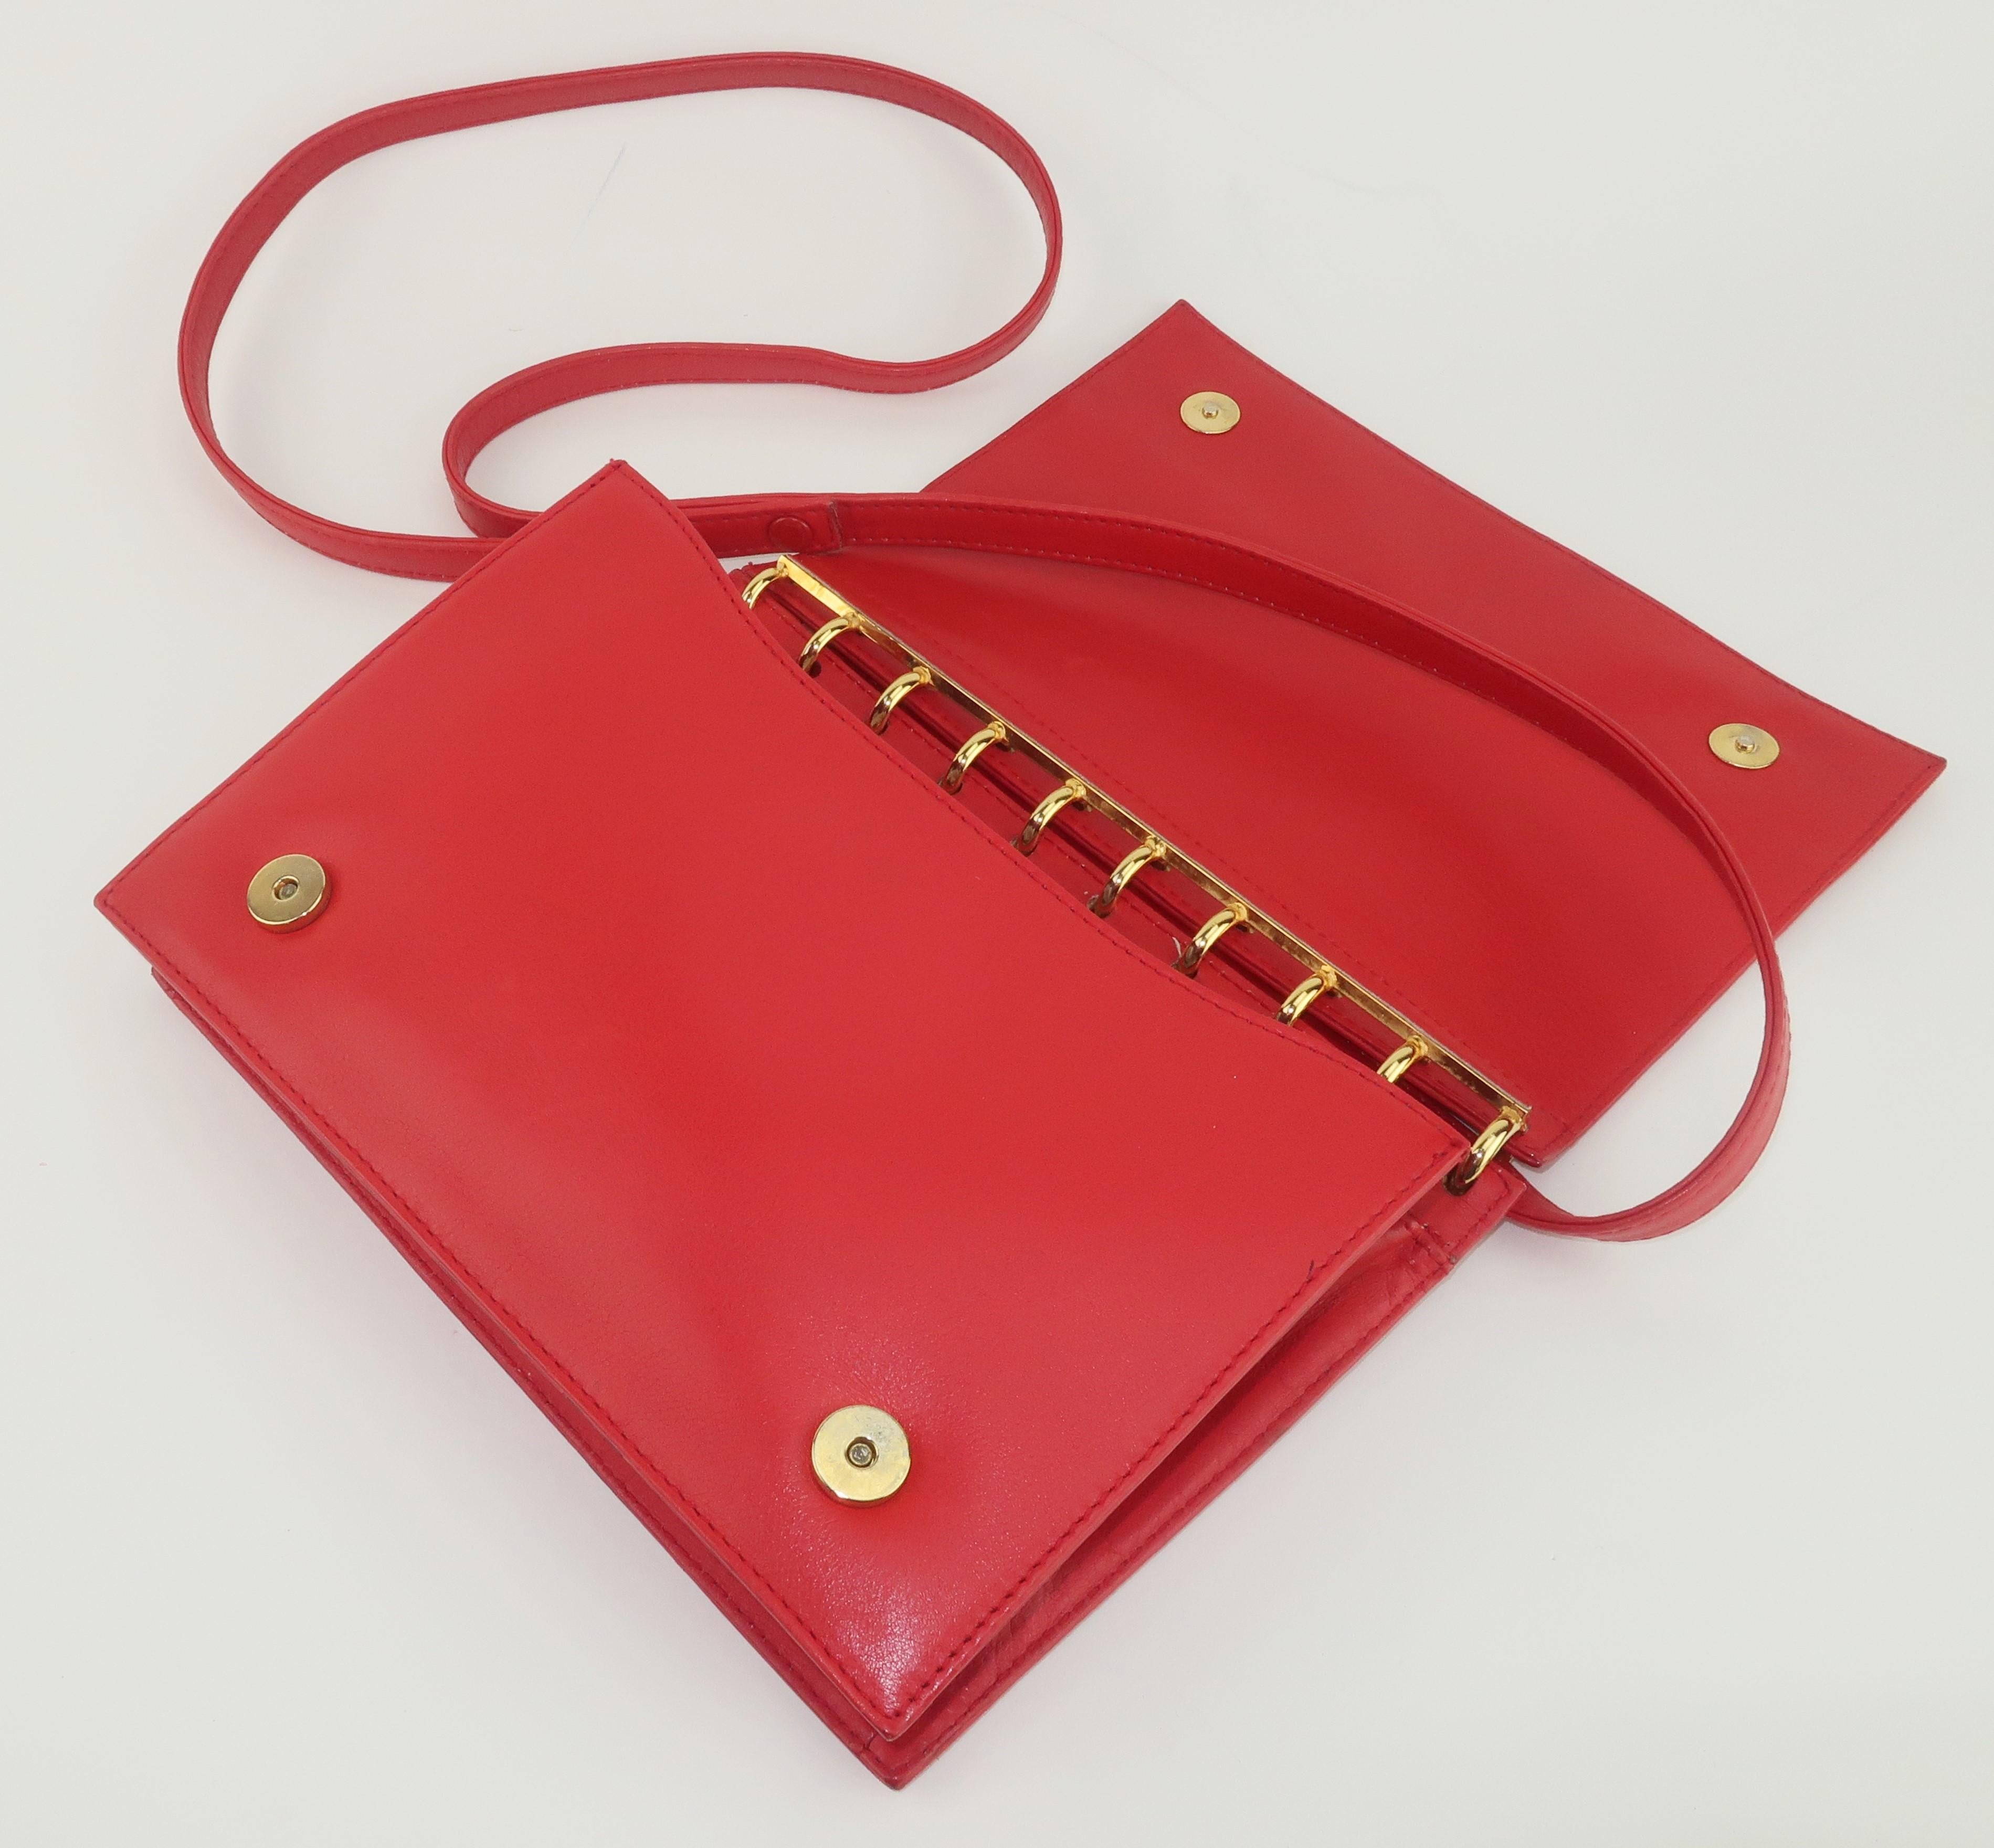 Valentino Red Leather Handbag With Spiral Hardware, 1980’s 4